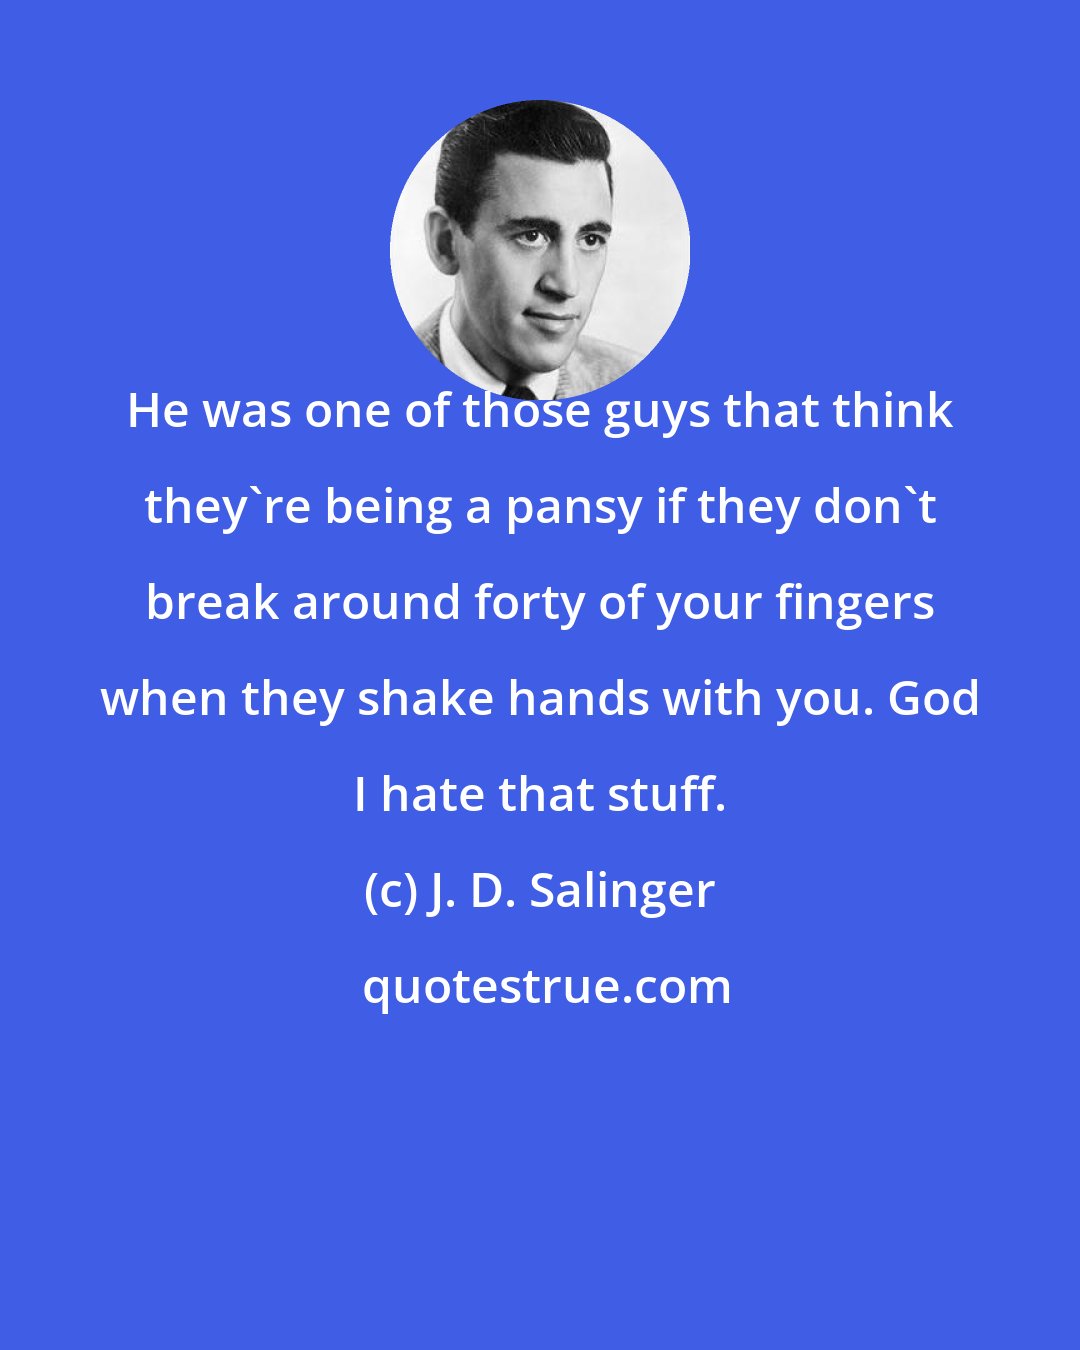 J. D. Salinger: He was one of those guys that think they're being a pansy if they don't break around forty of your fingers when they shake hands with you. God I hate that stuff.